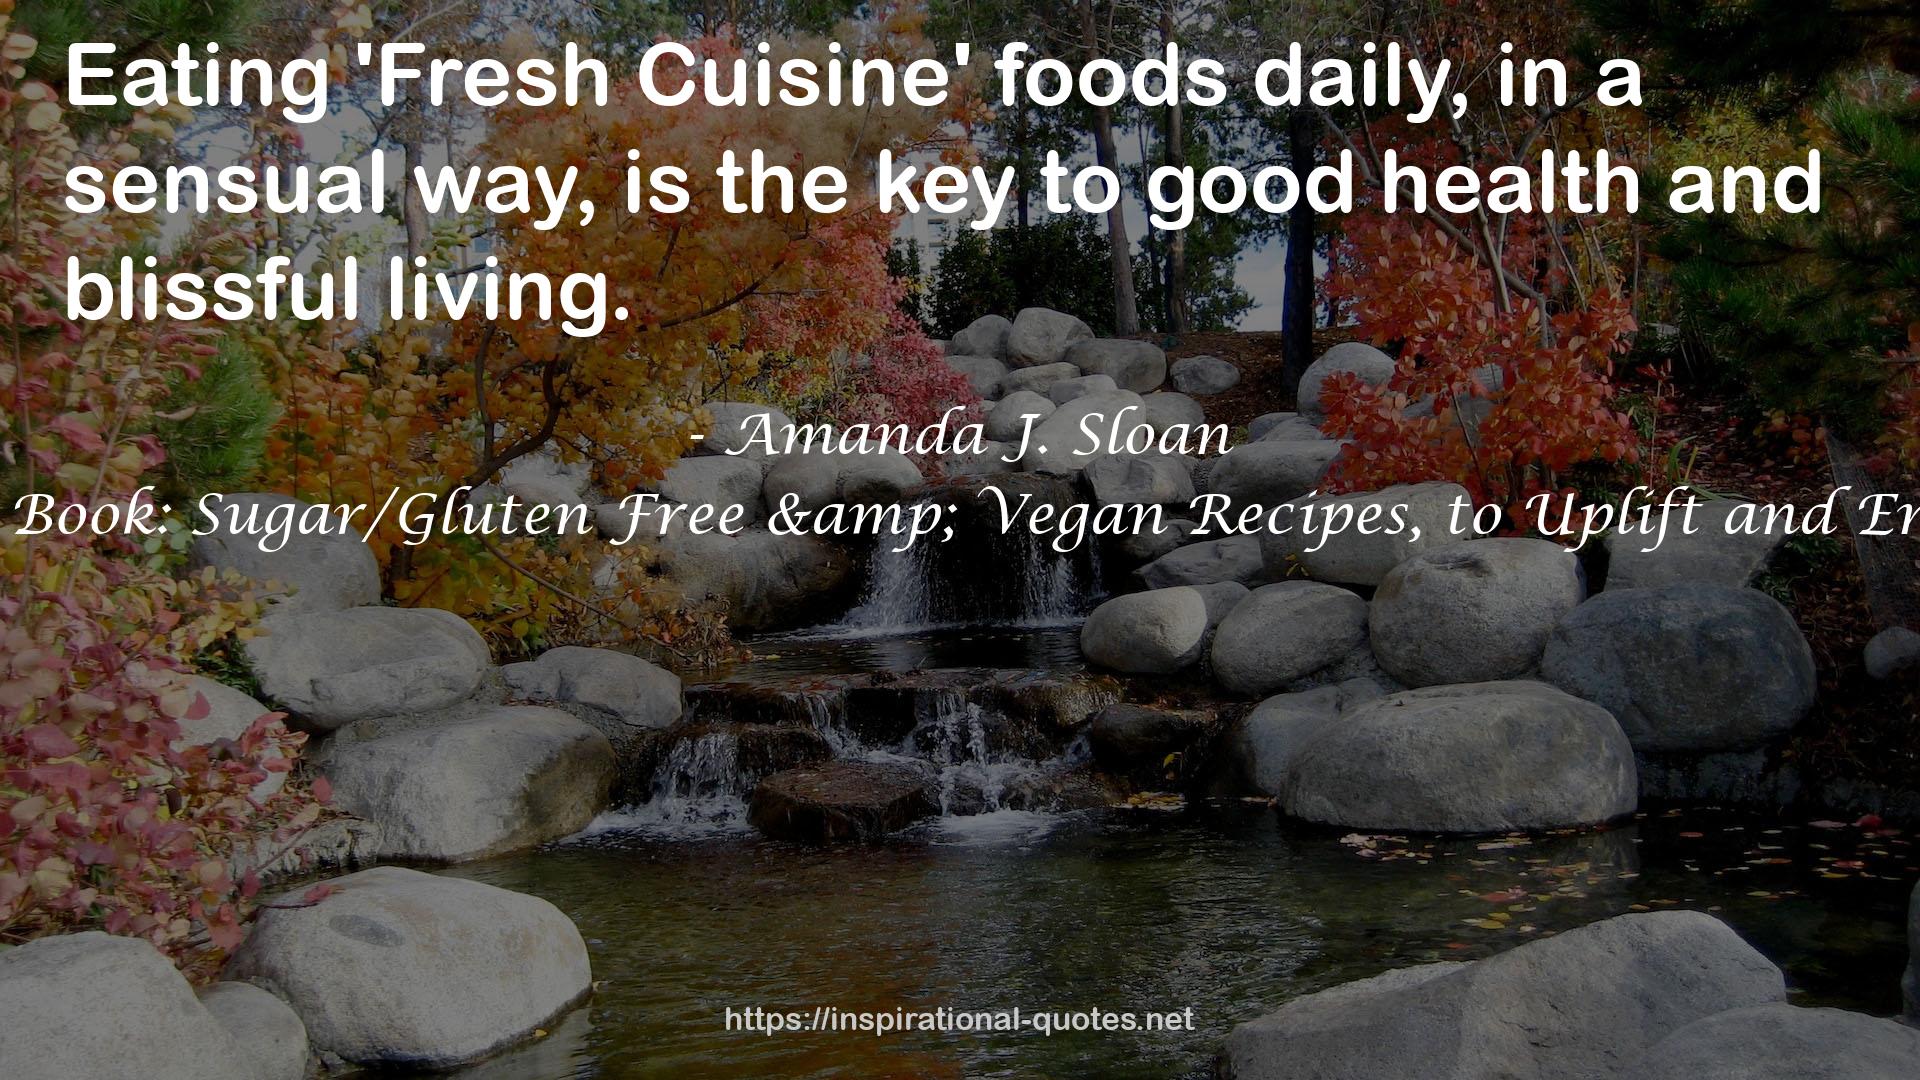 Fresh Cuisine Recipe Book: Sugar/Gluten Free & Vegan Recipes, to Uplift and Enhance Your Lifestyle QUOTES